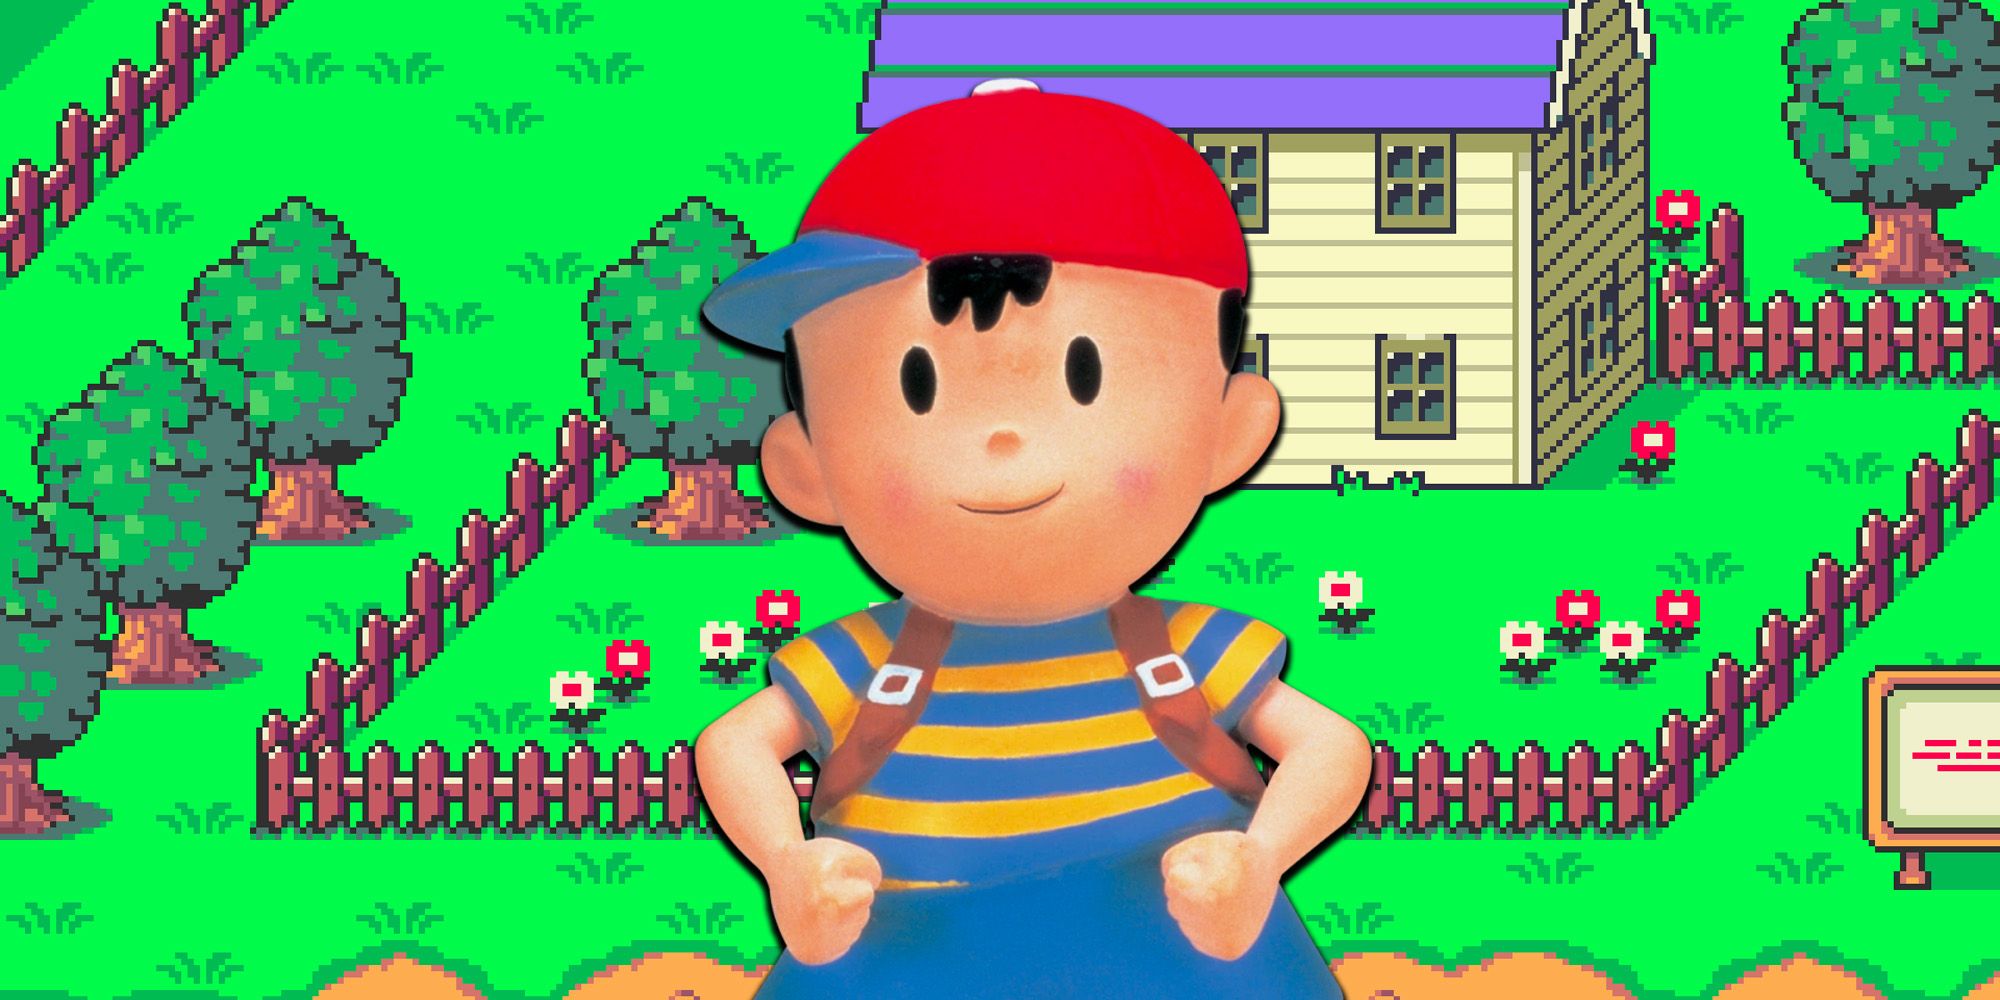 Ness from Earthbound in front of a backdrop of a house from the game.